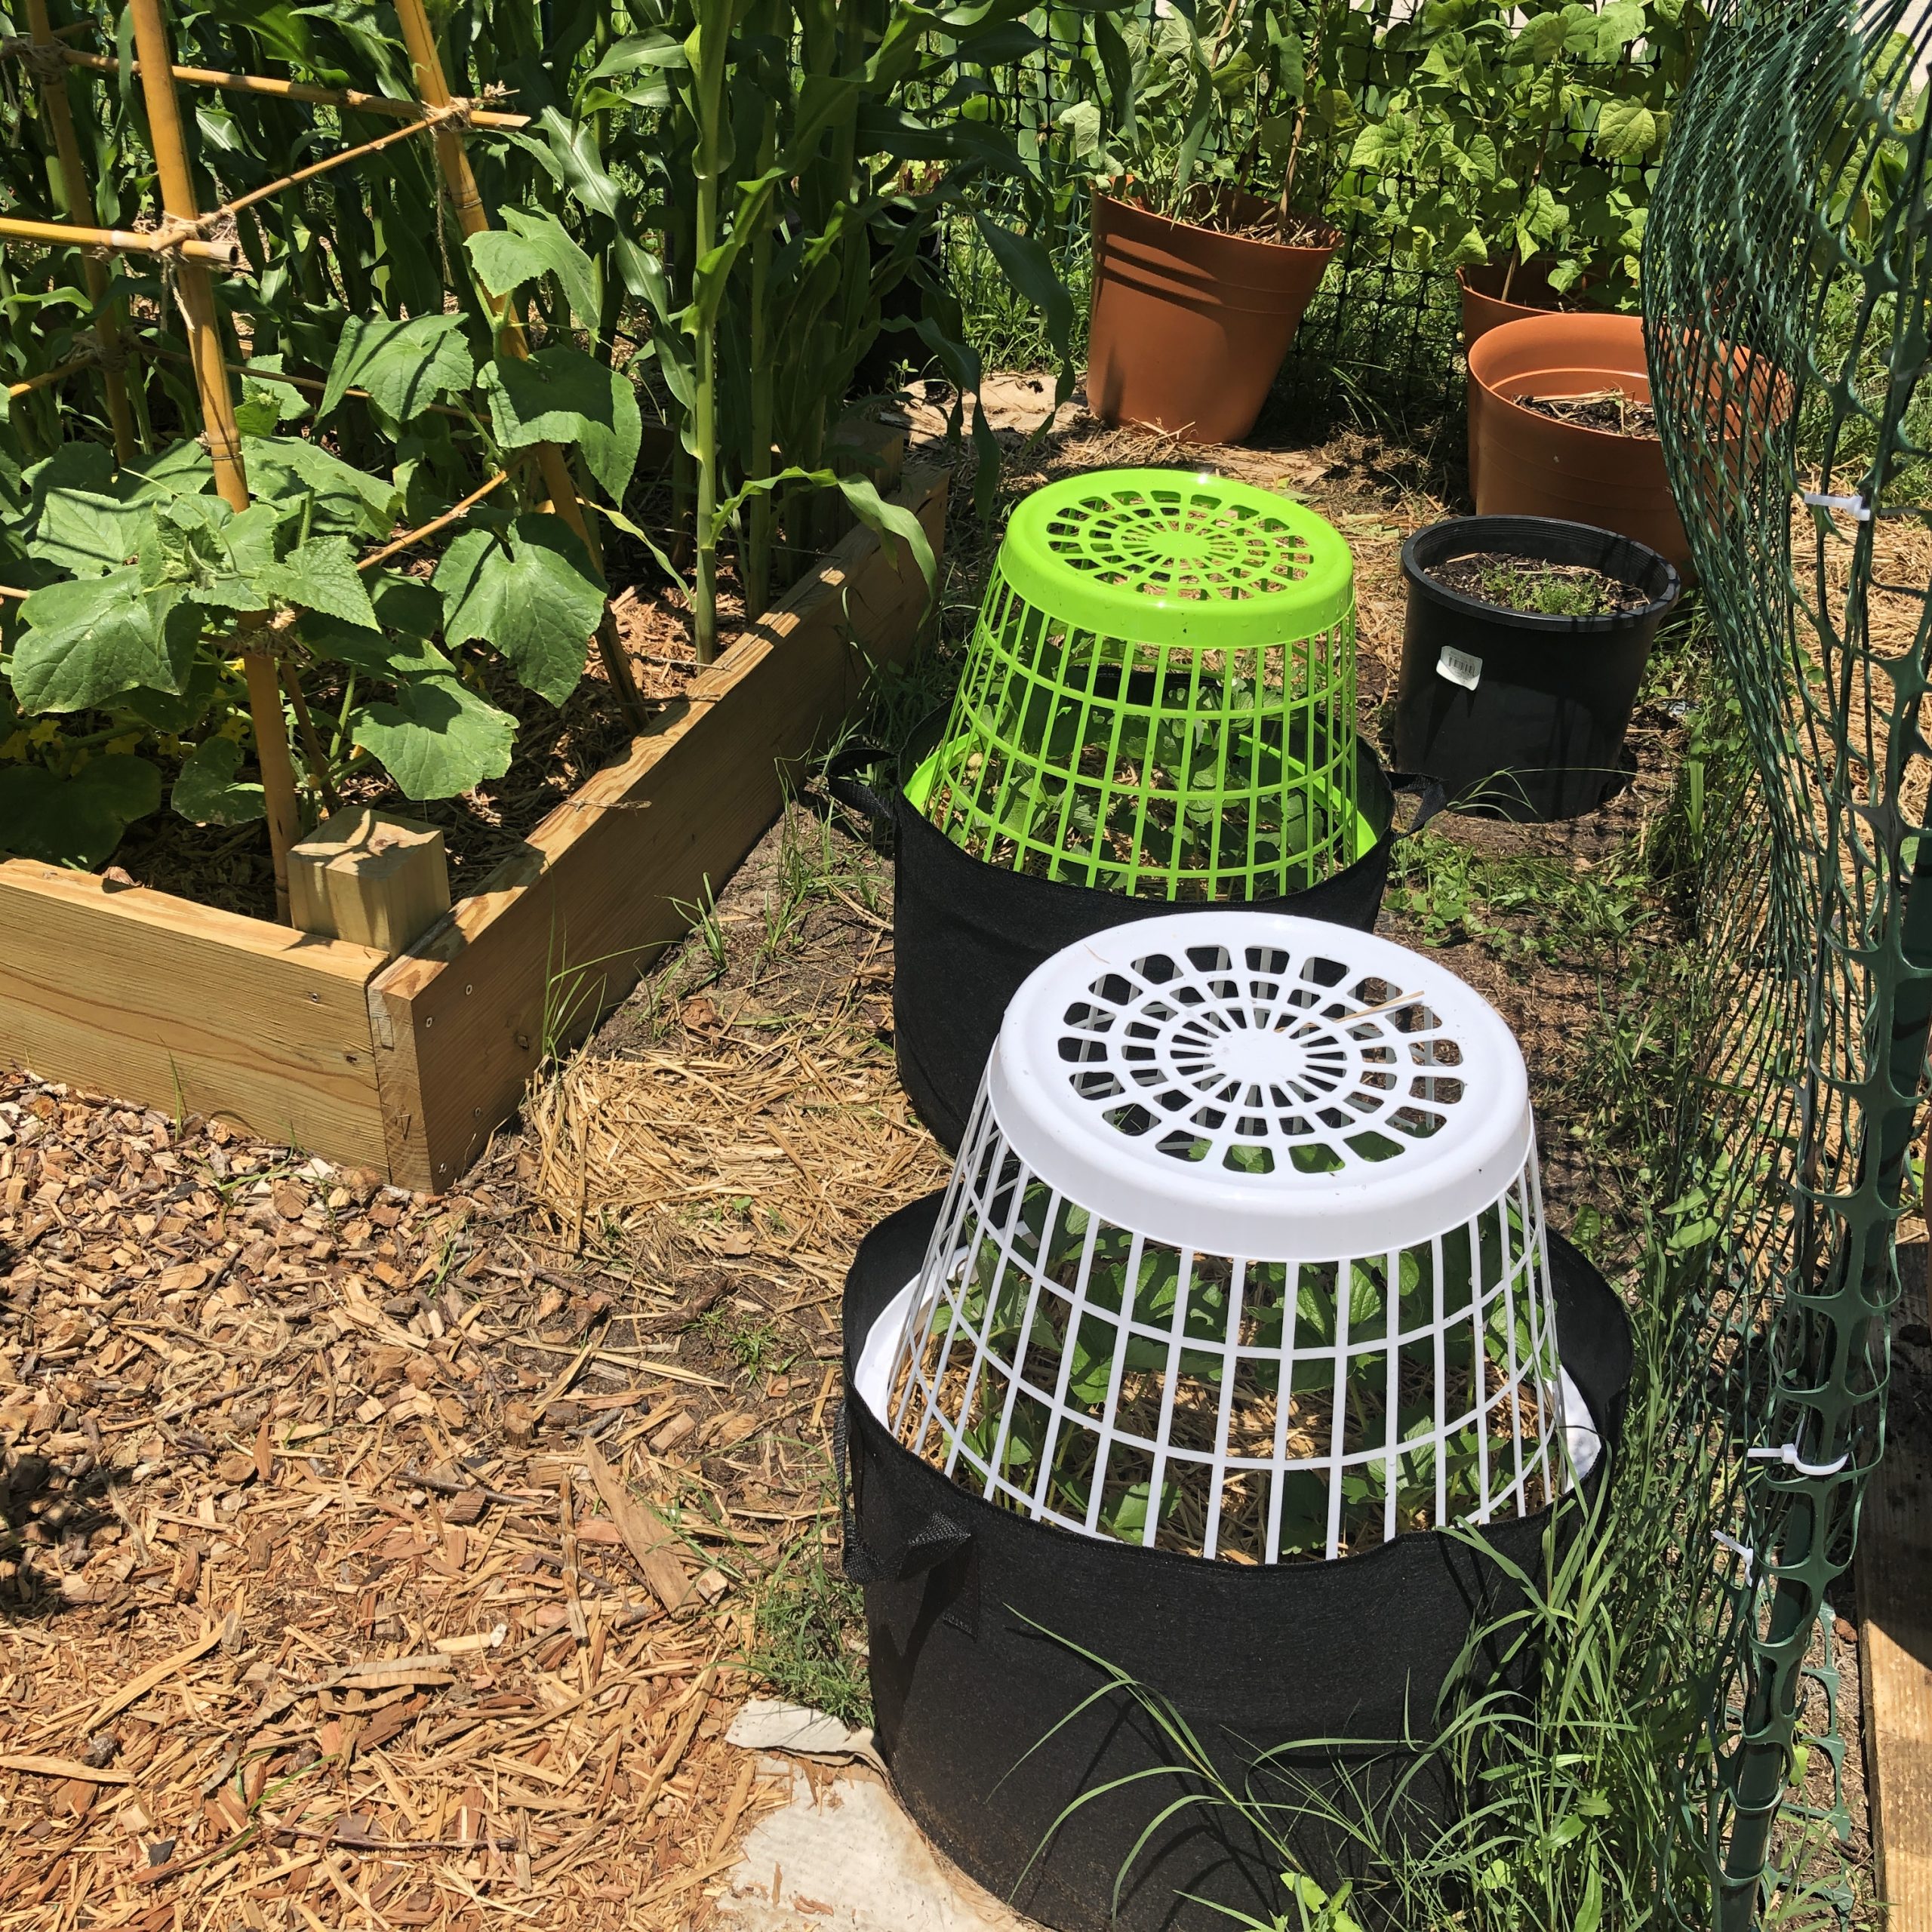 Clothes baskets covering strawberry plants in grow bags